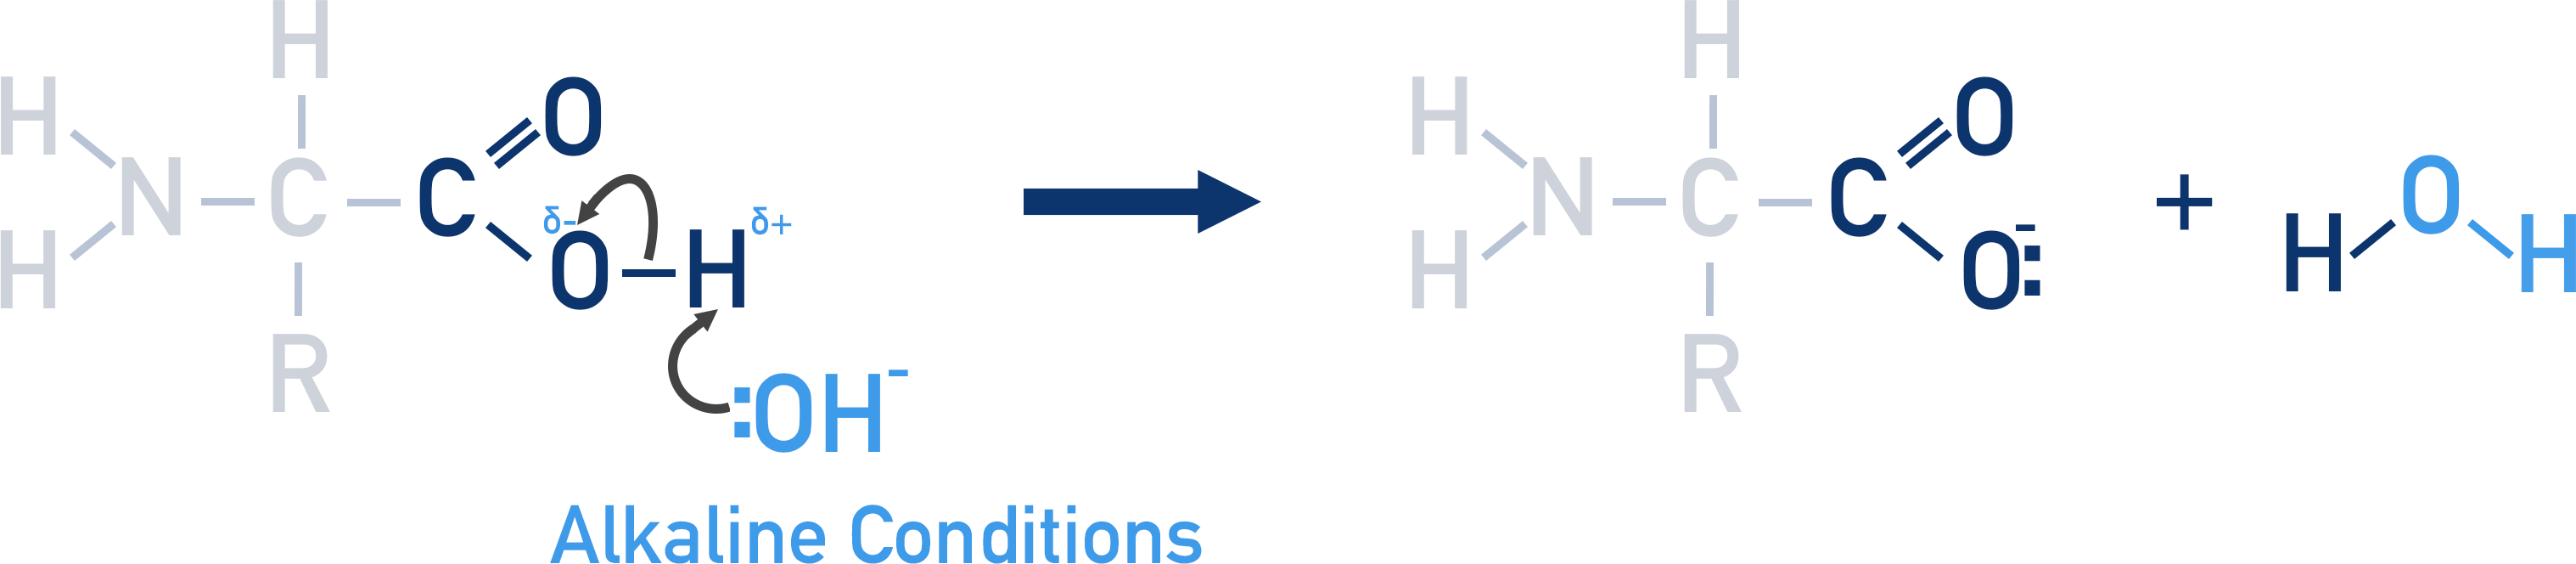 amino acid with hydroxide ions